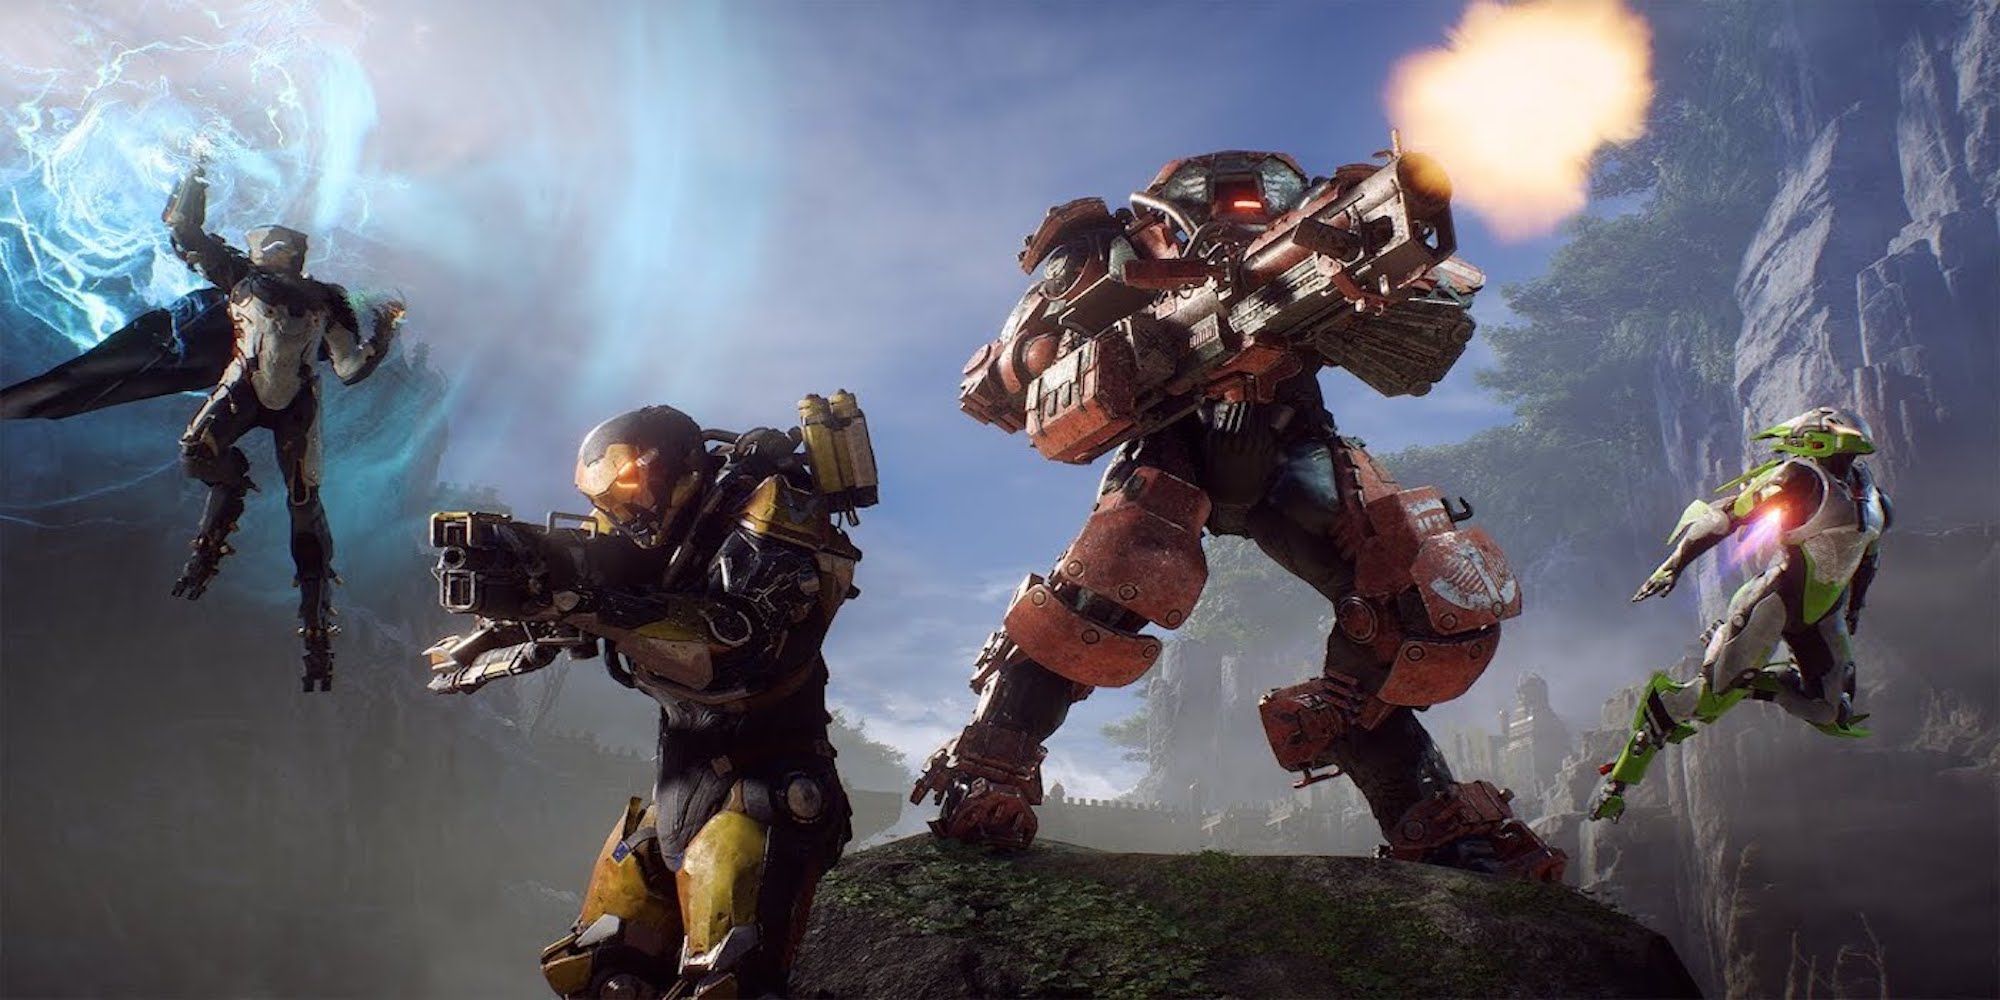 Promo art featuring characters from Anthem